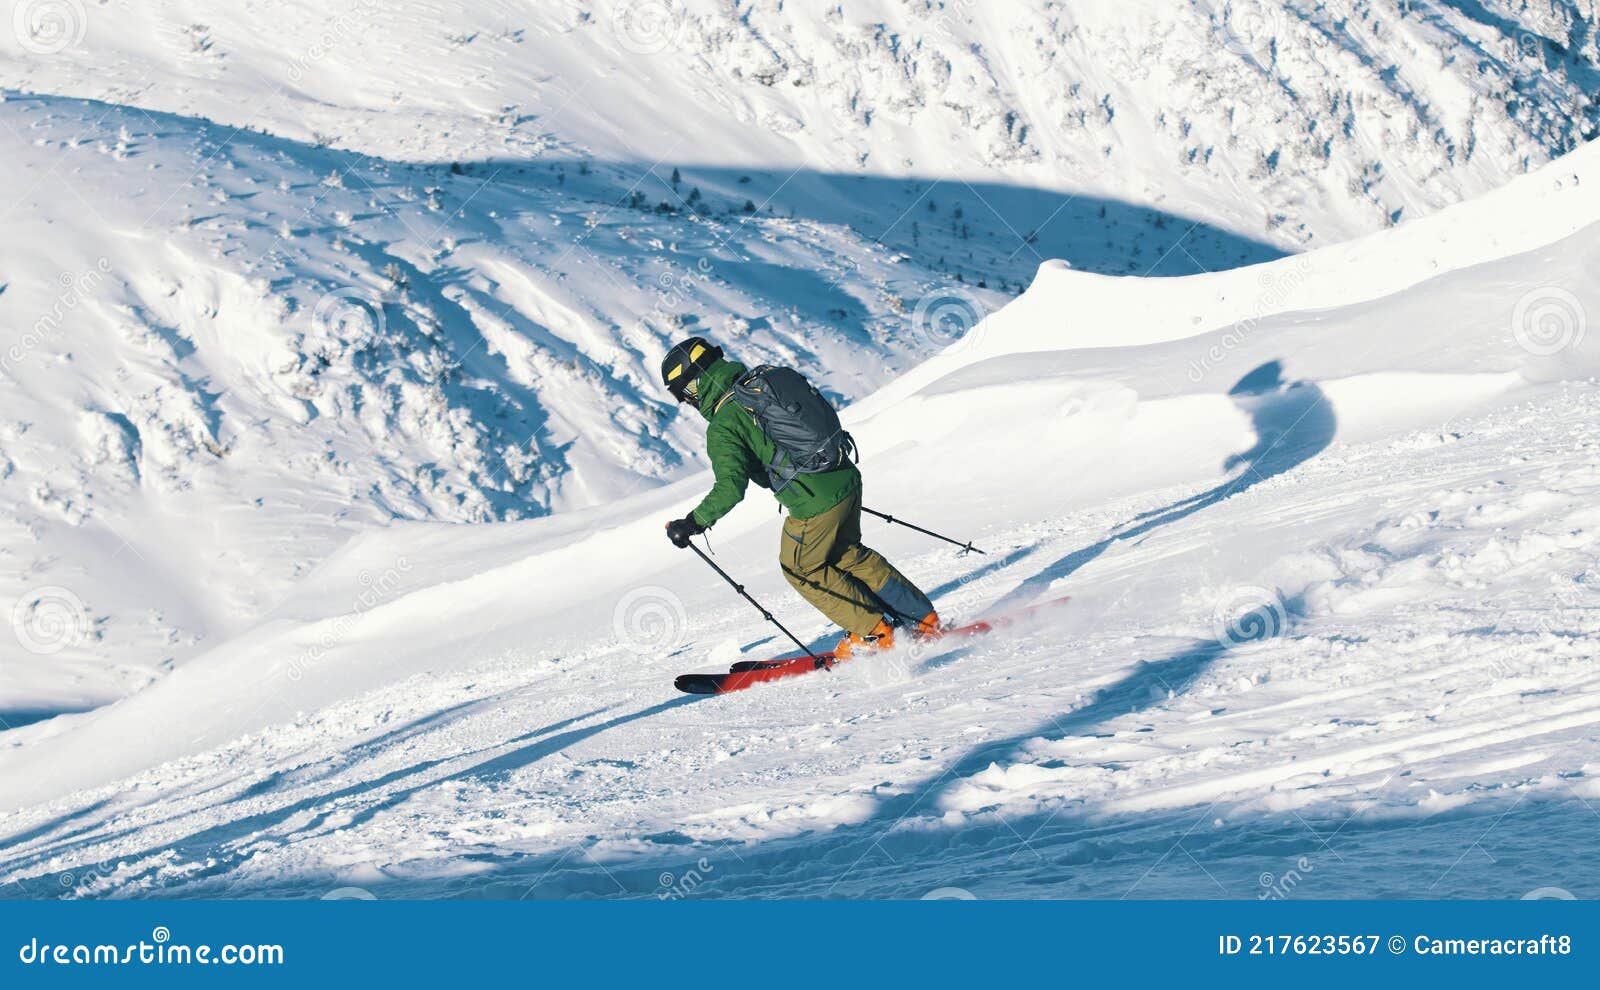 Skier on a Sloppy Mountain on a Bright Sunny Day - Skiing Editorial ...